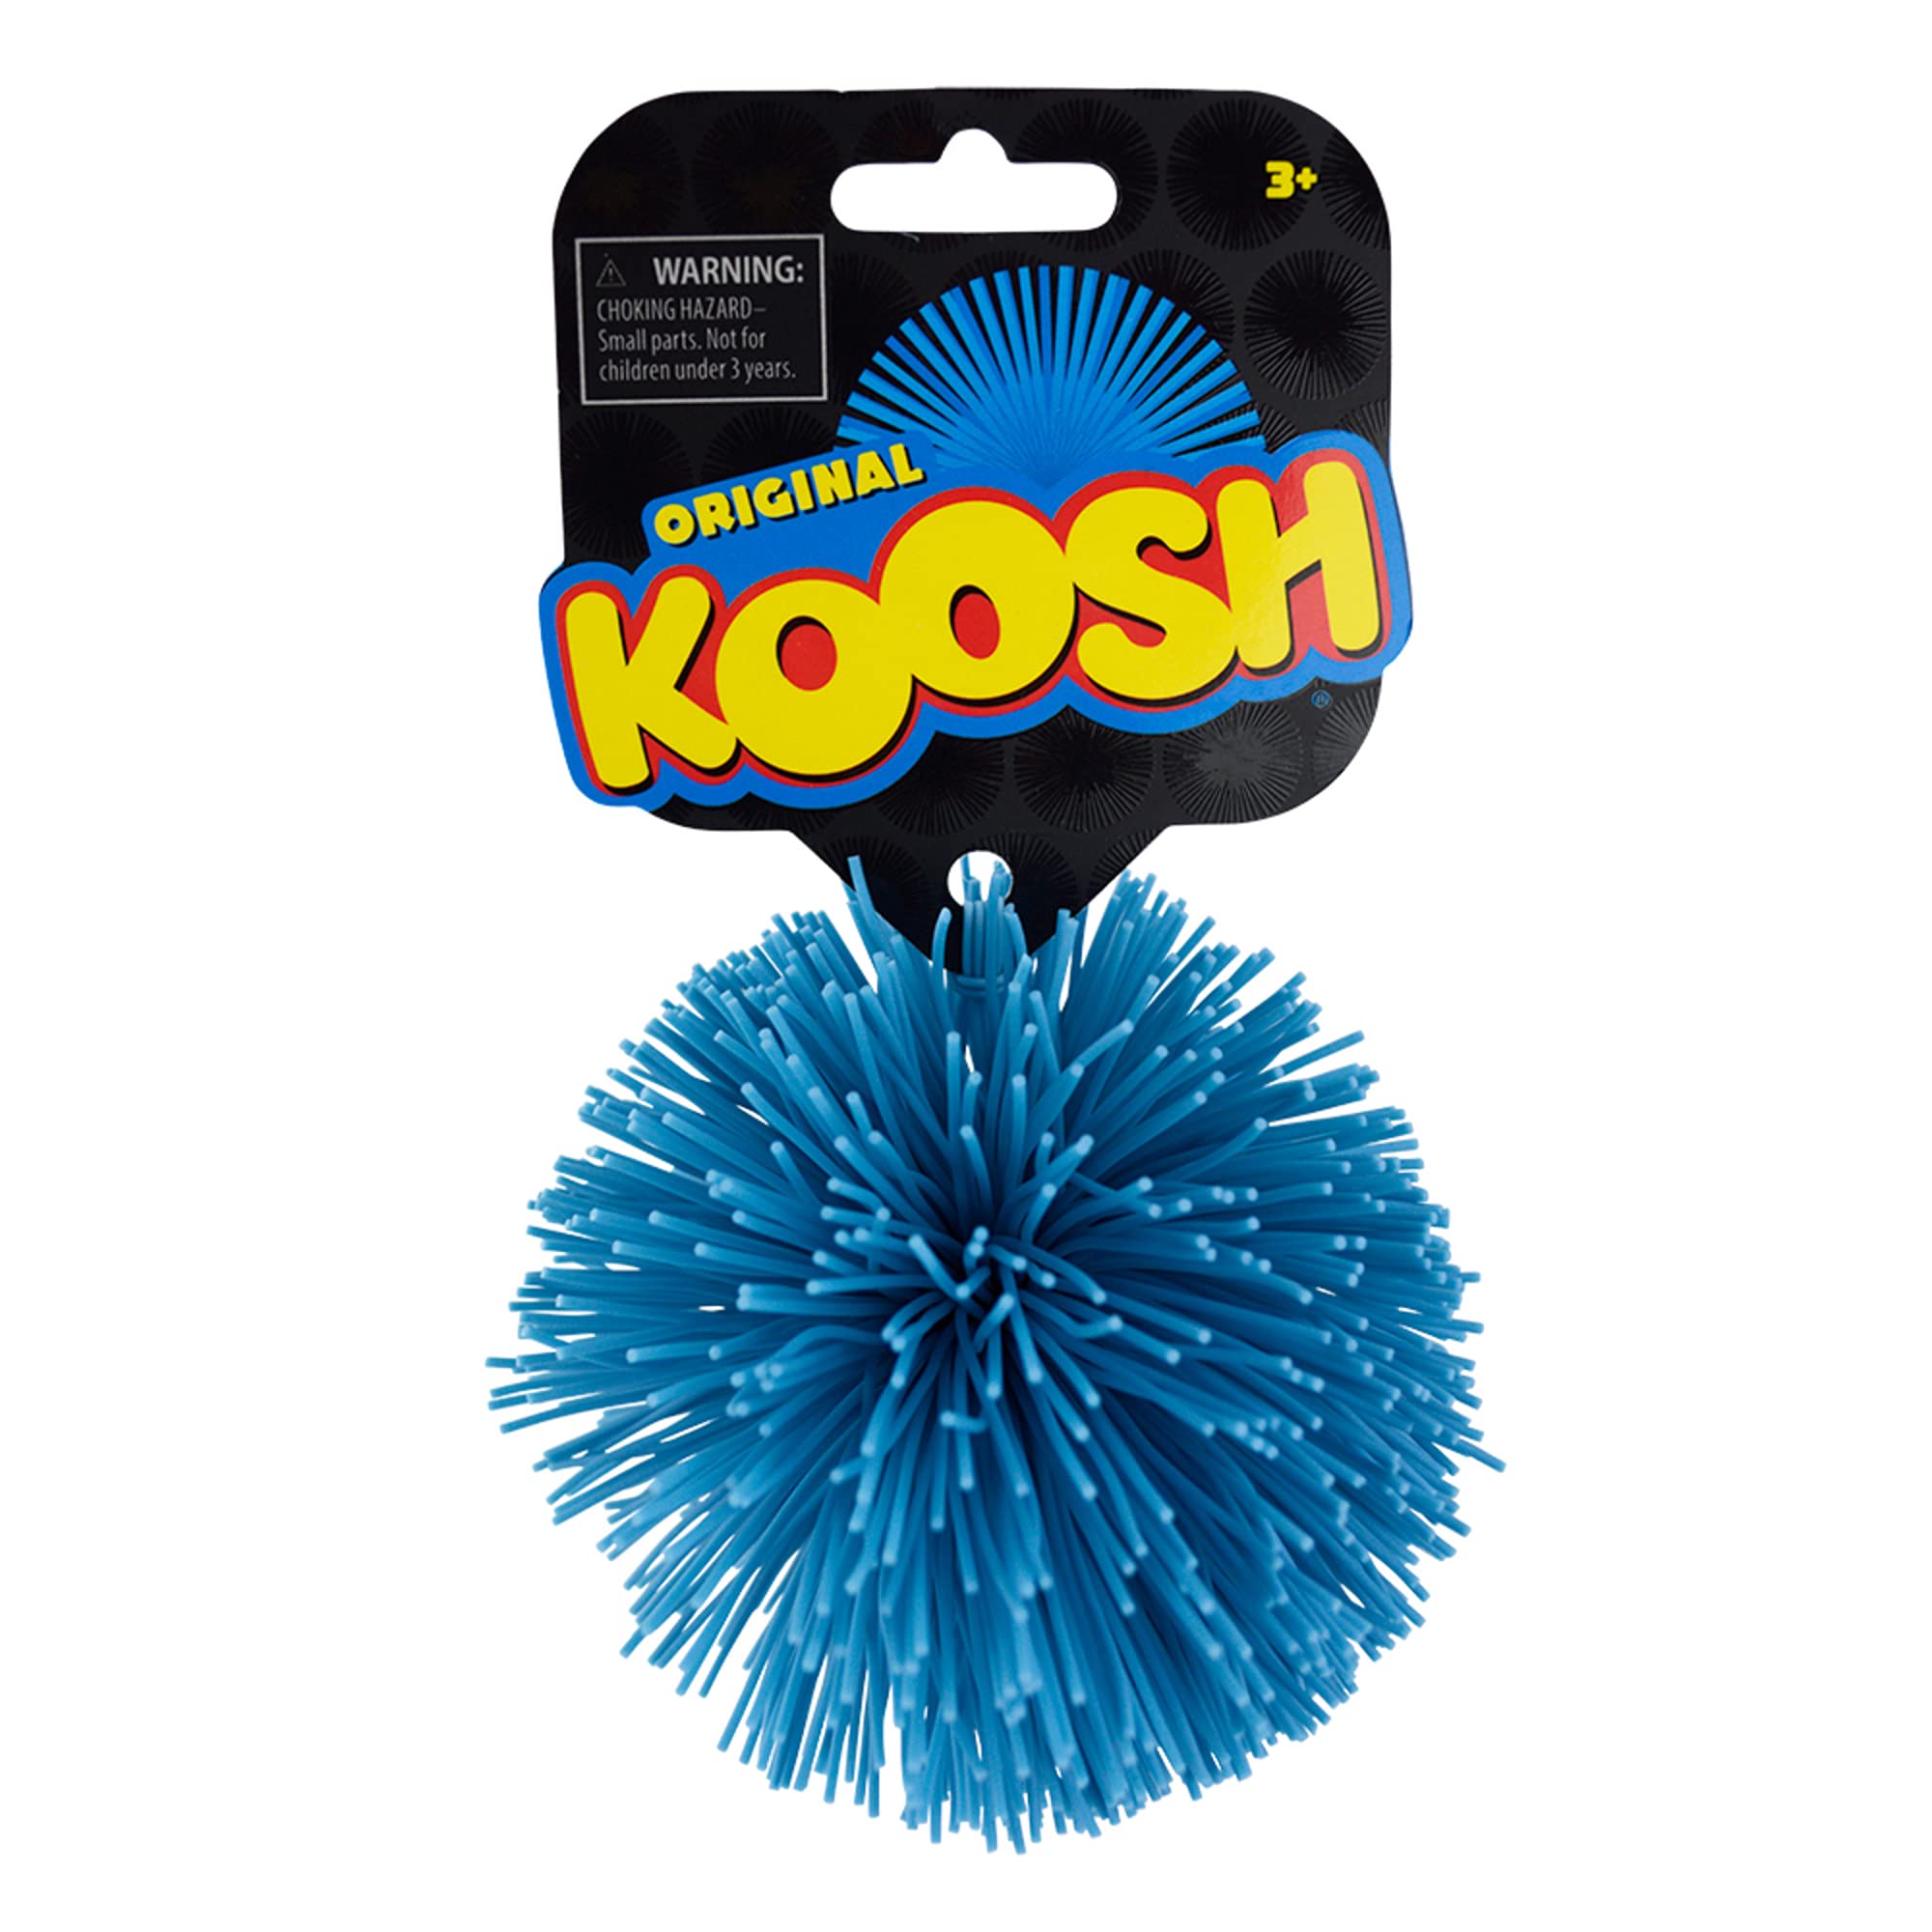 Koosh Classic 3-in - Easy to Catch, Hard to Put Down - Ages 3+